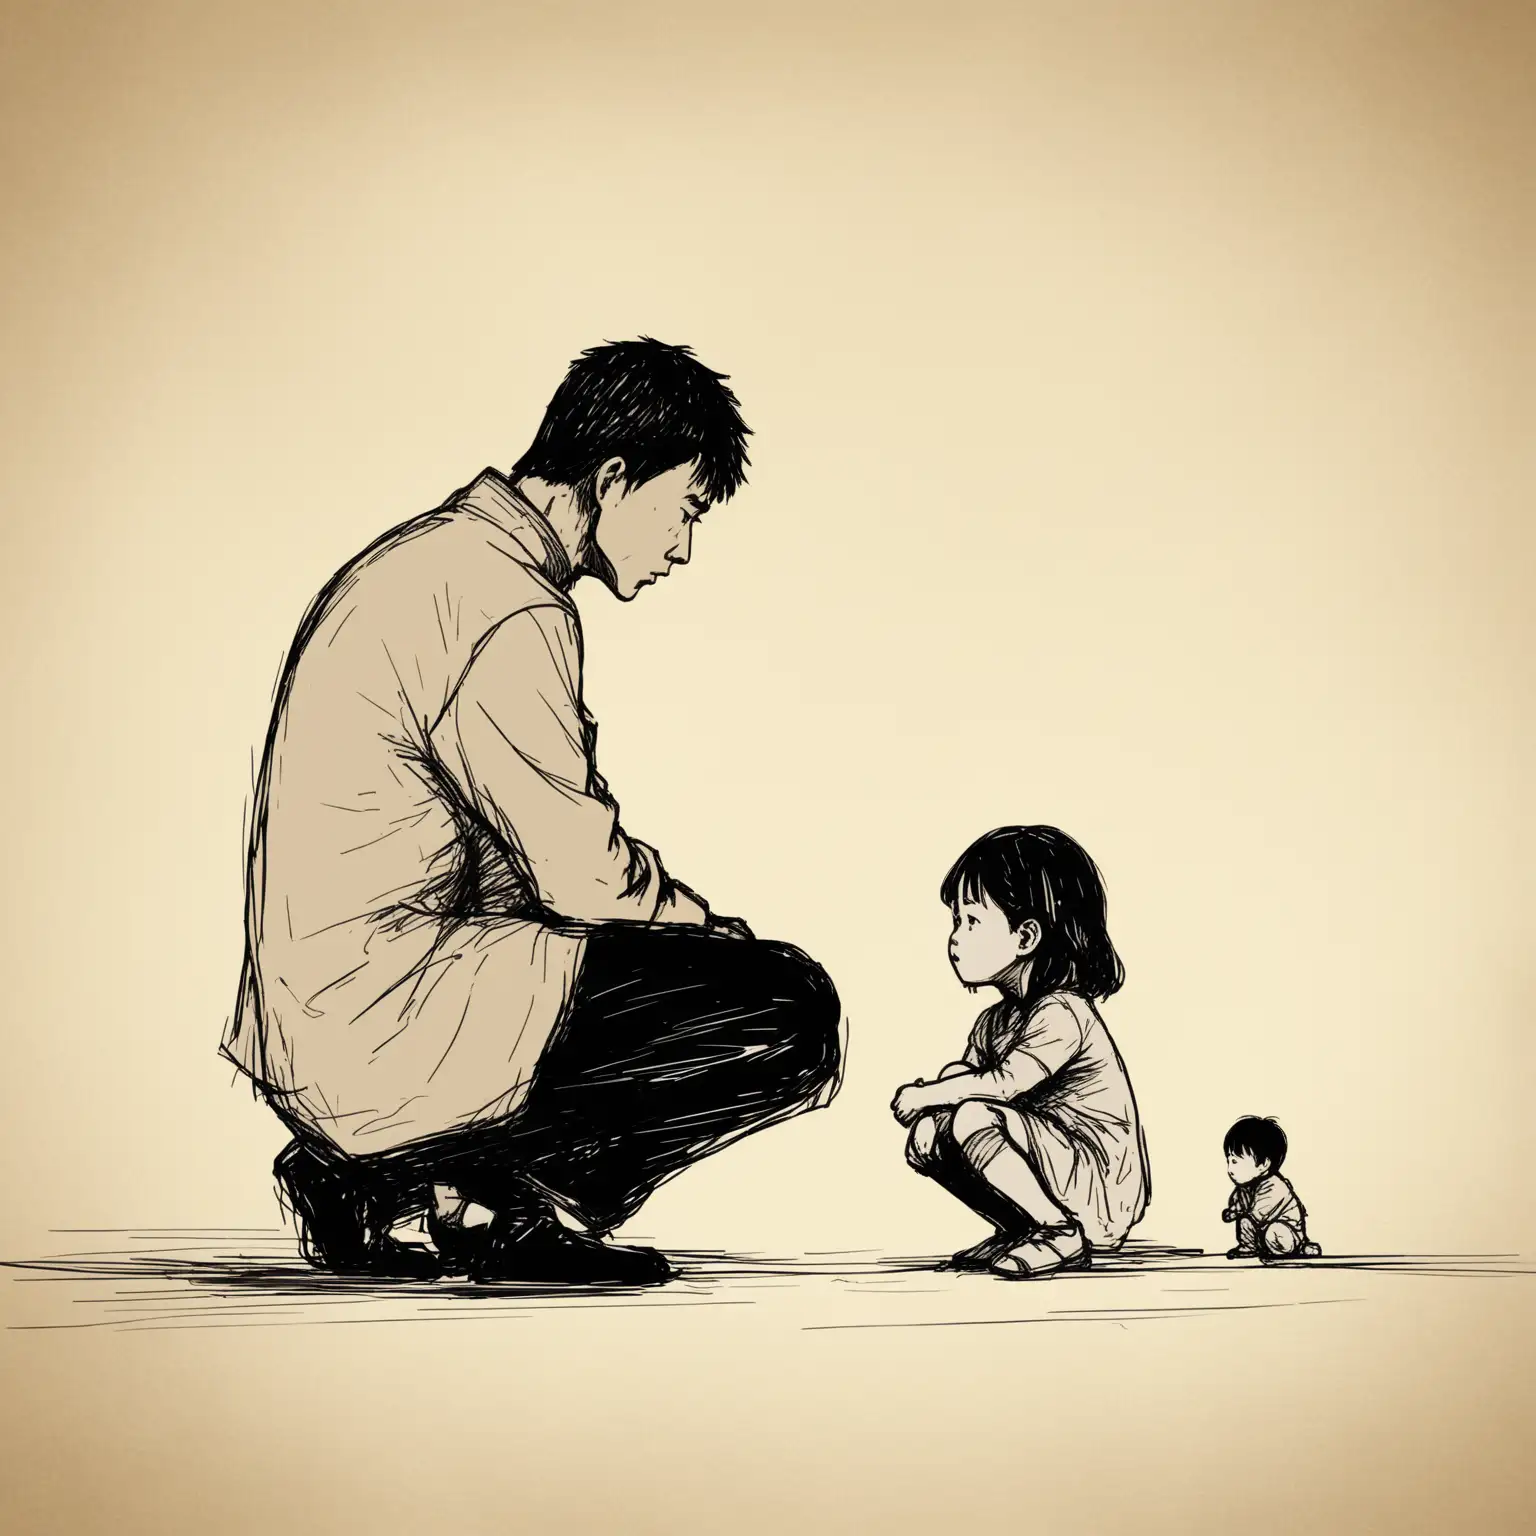 sketch style, an Asian male and an Asian female facing off, with a sad-looking child crouching next to them, featuring soft beige as the highlight, and a subtle texture in the background. 16:9